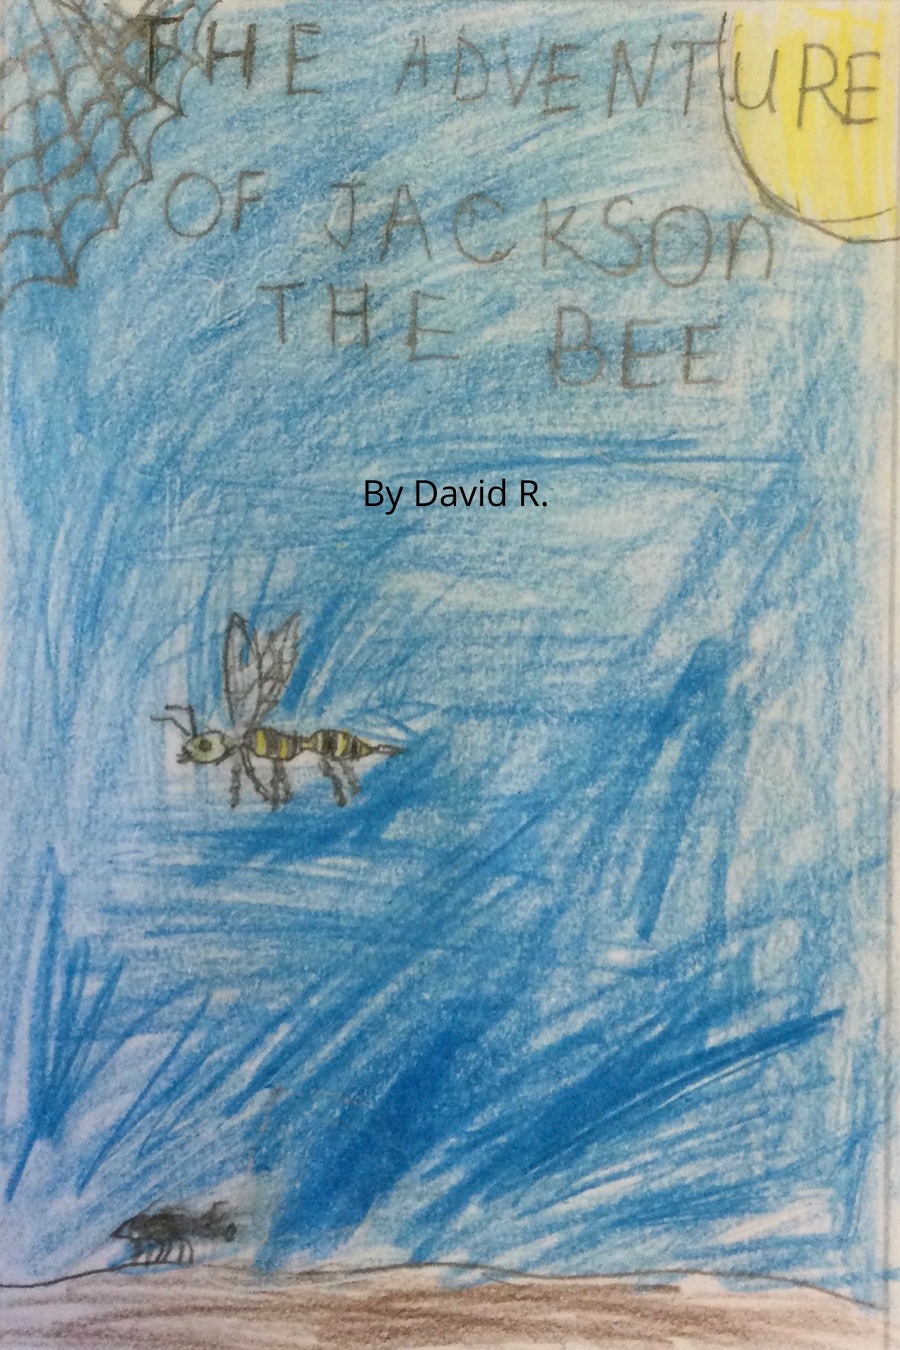 The Adventure of Jackson the Bee by David R